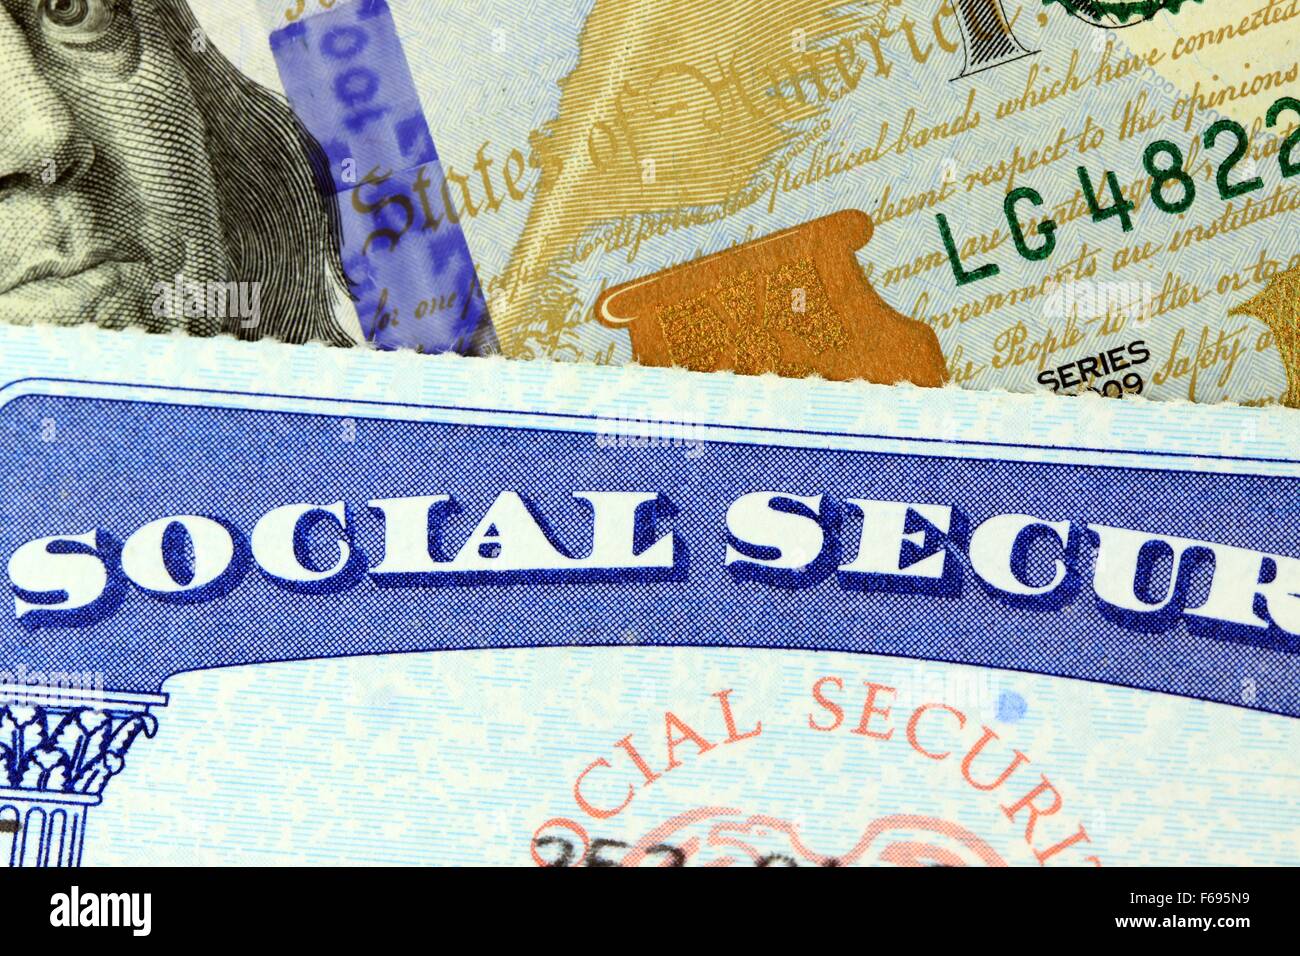 Social security card and US currency one hundred dollar bill Stock Photo